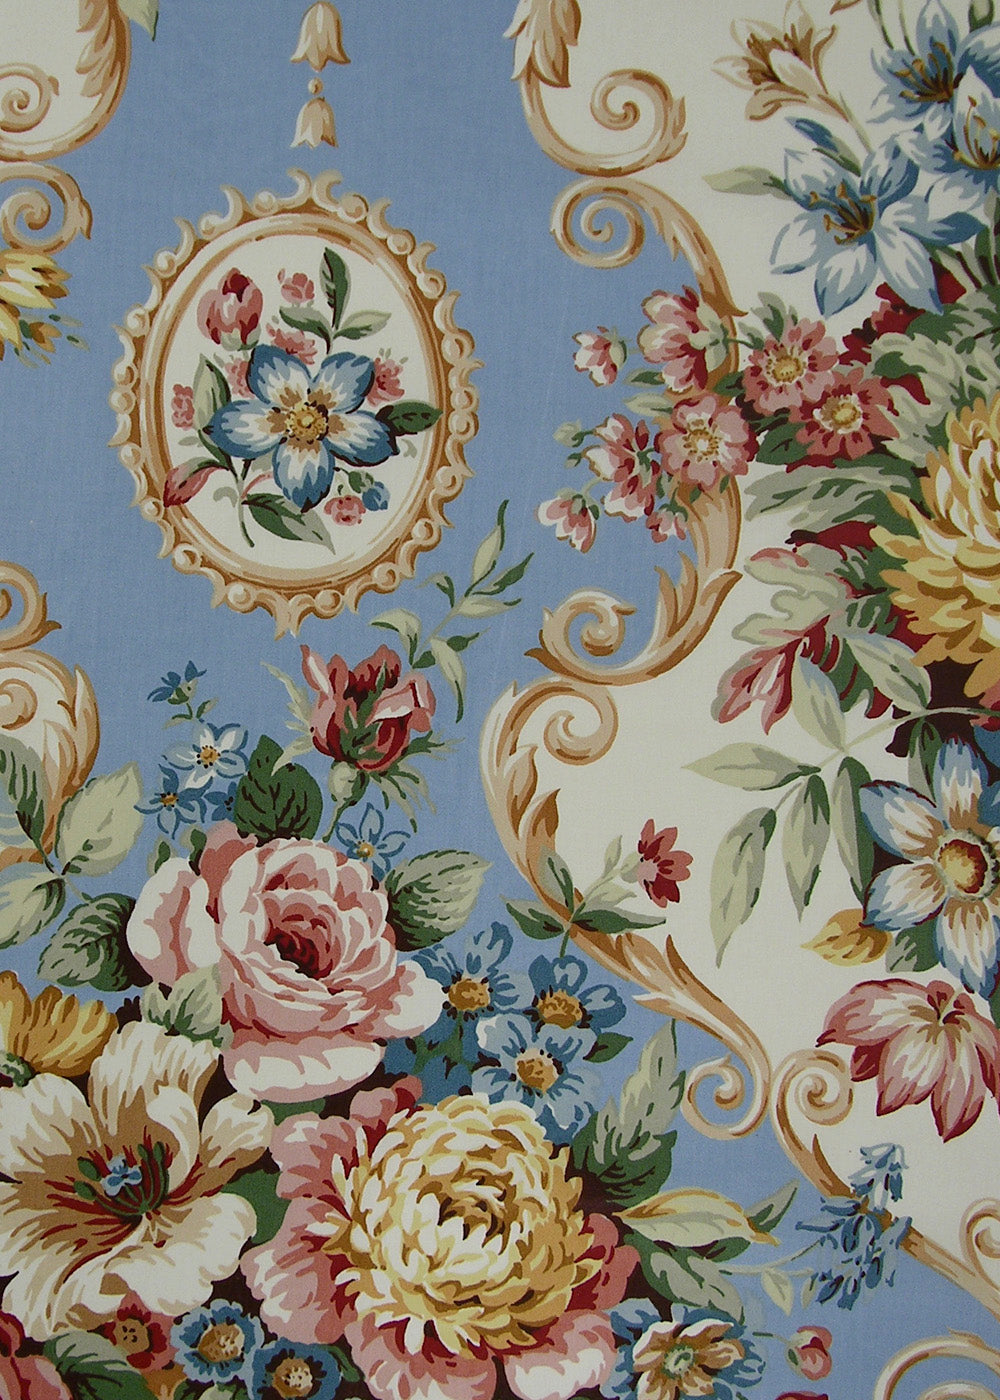 chintz fabric printed with baroque scrolls, multicolored flowers, and frames on a sky blue background